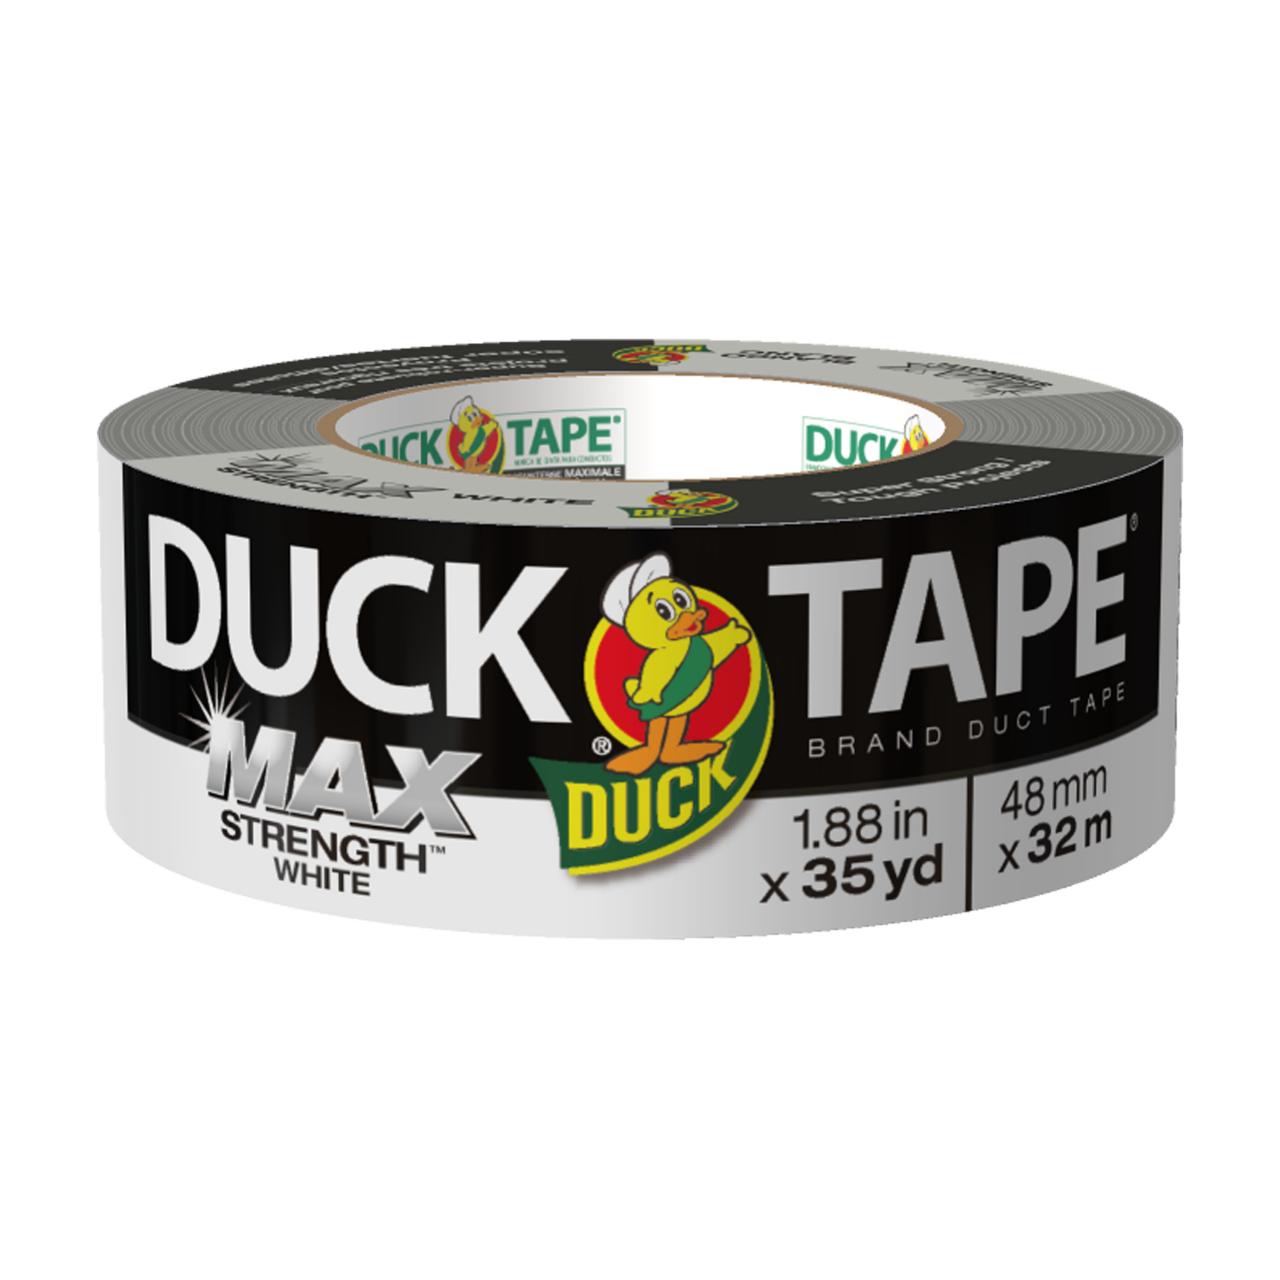 Buy Duck Brand MAX Strength Duct Tape Online in Hong Kong. B00VK7FCLO